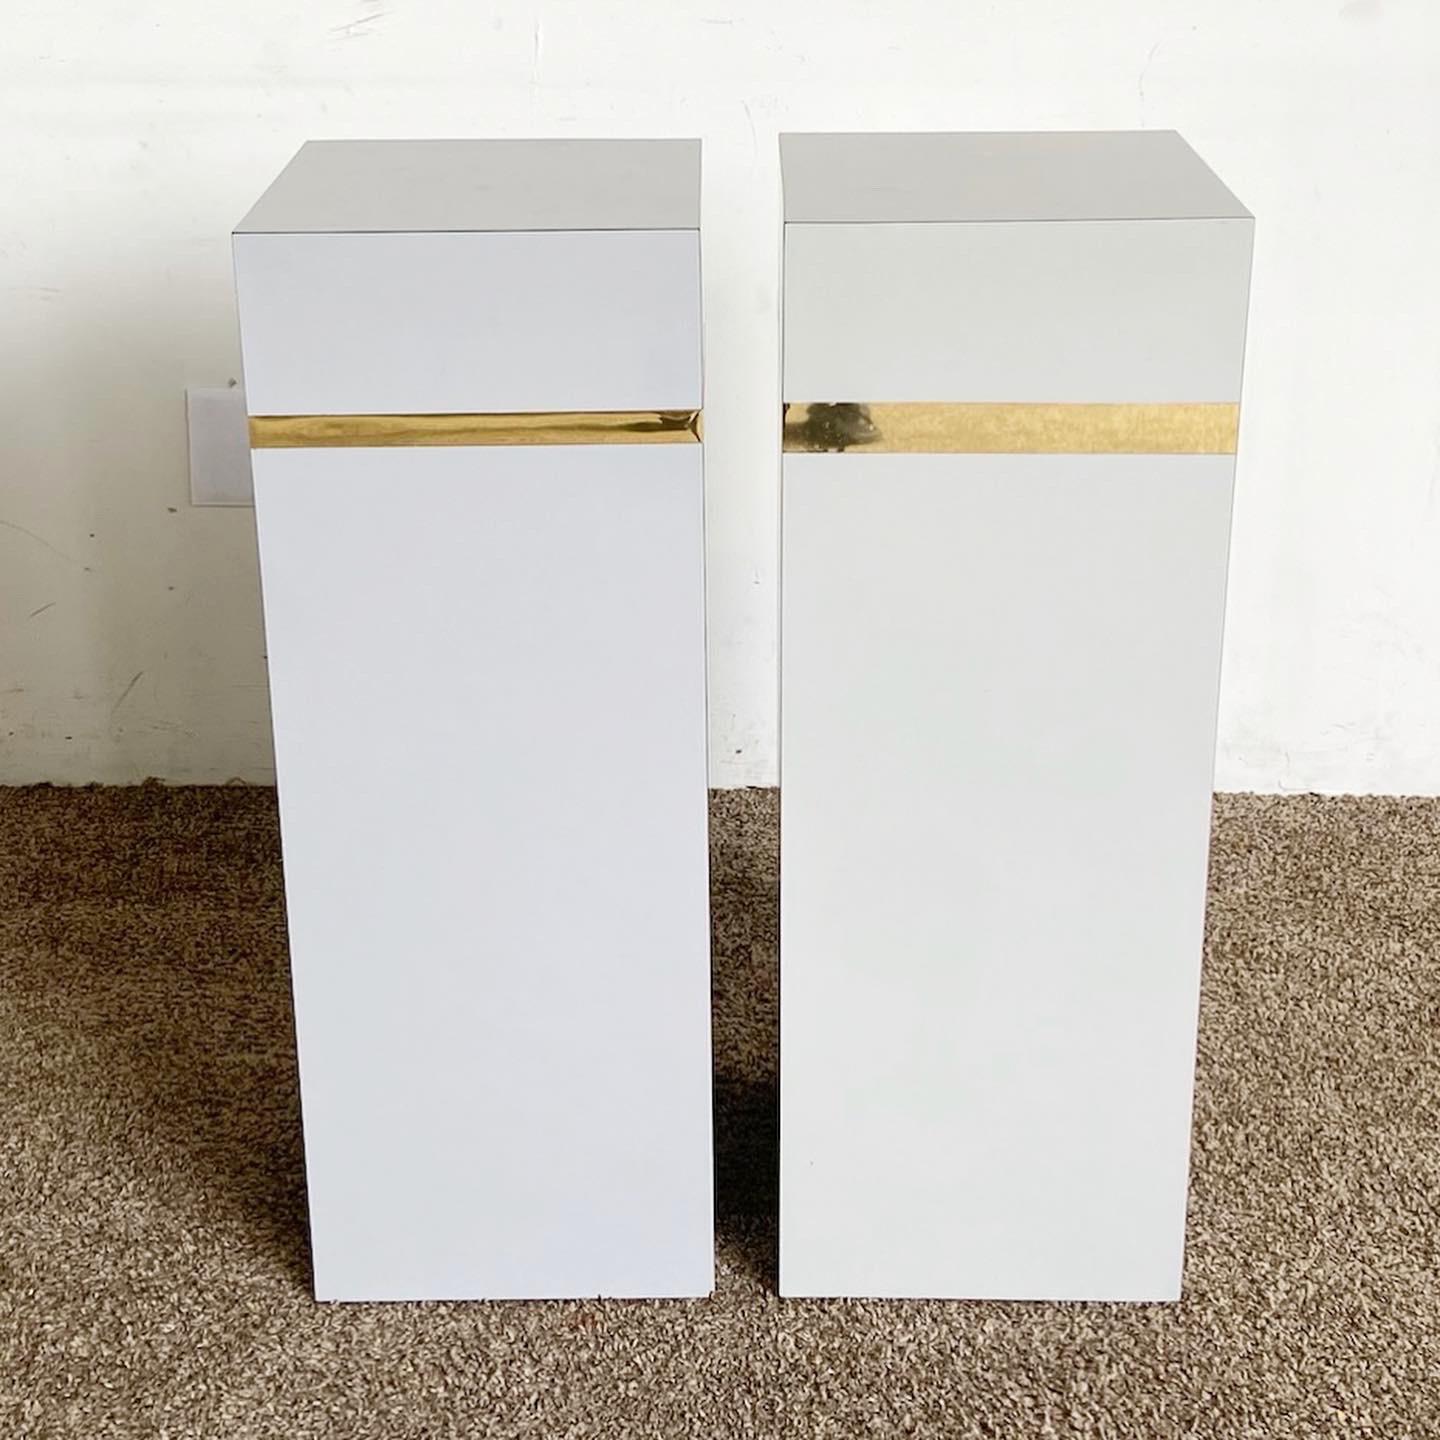 Enhance your home with our Postmodern Gray Lacquer Laminate and Gold Rectangular Pedestals, a pair that combines sleek design with bold gold accents.

Features sleek laminate surfaces in two subtly different shades of gray.
Gold accents add a touch